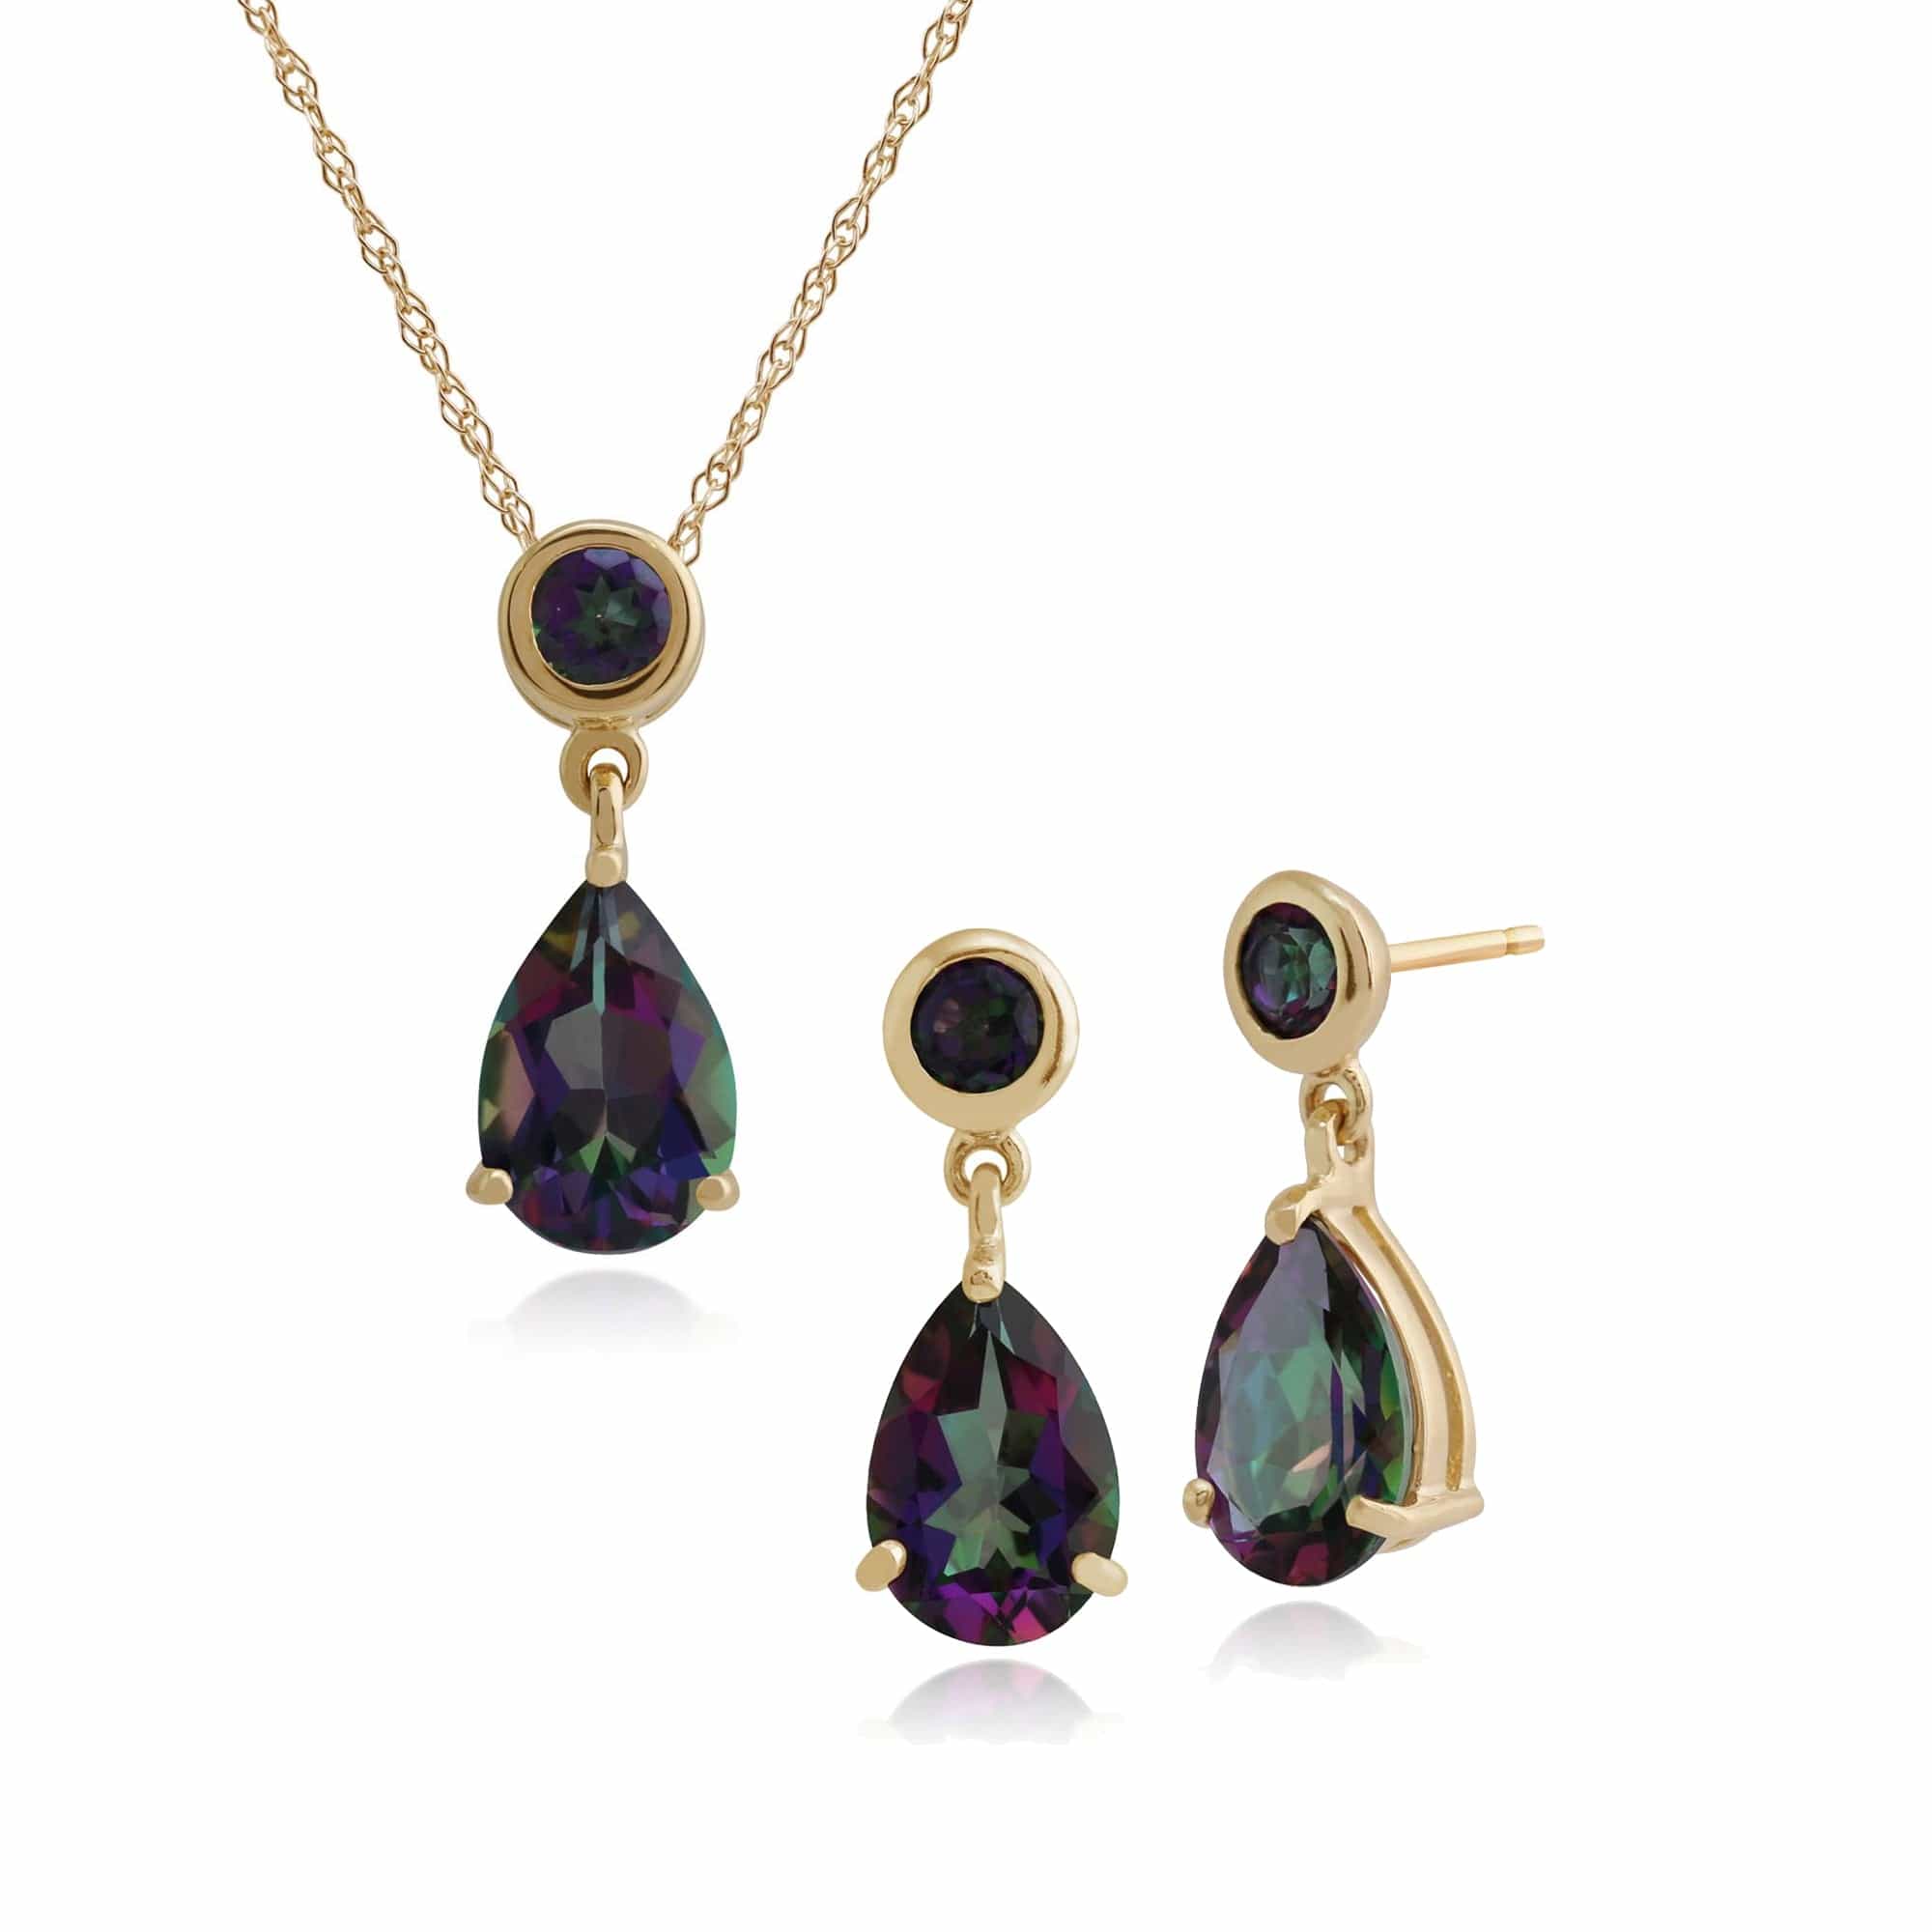 186E0148079-186P0188079 Classic Pear & Round Mystic Topaz Drop Earrings & Pendant Set in 9ct Gold 1